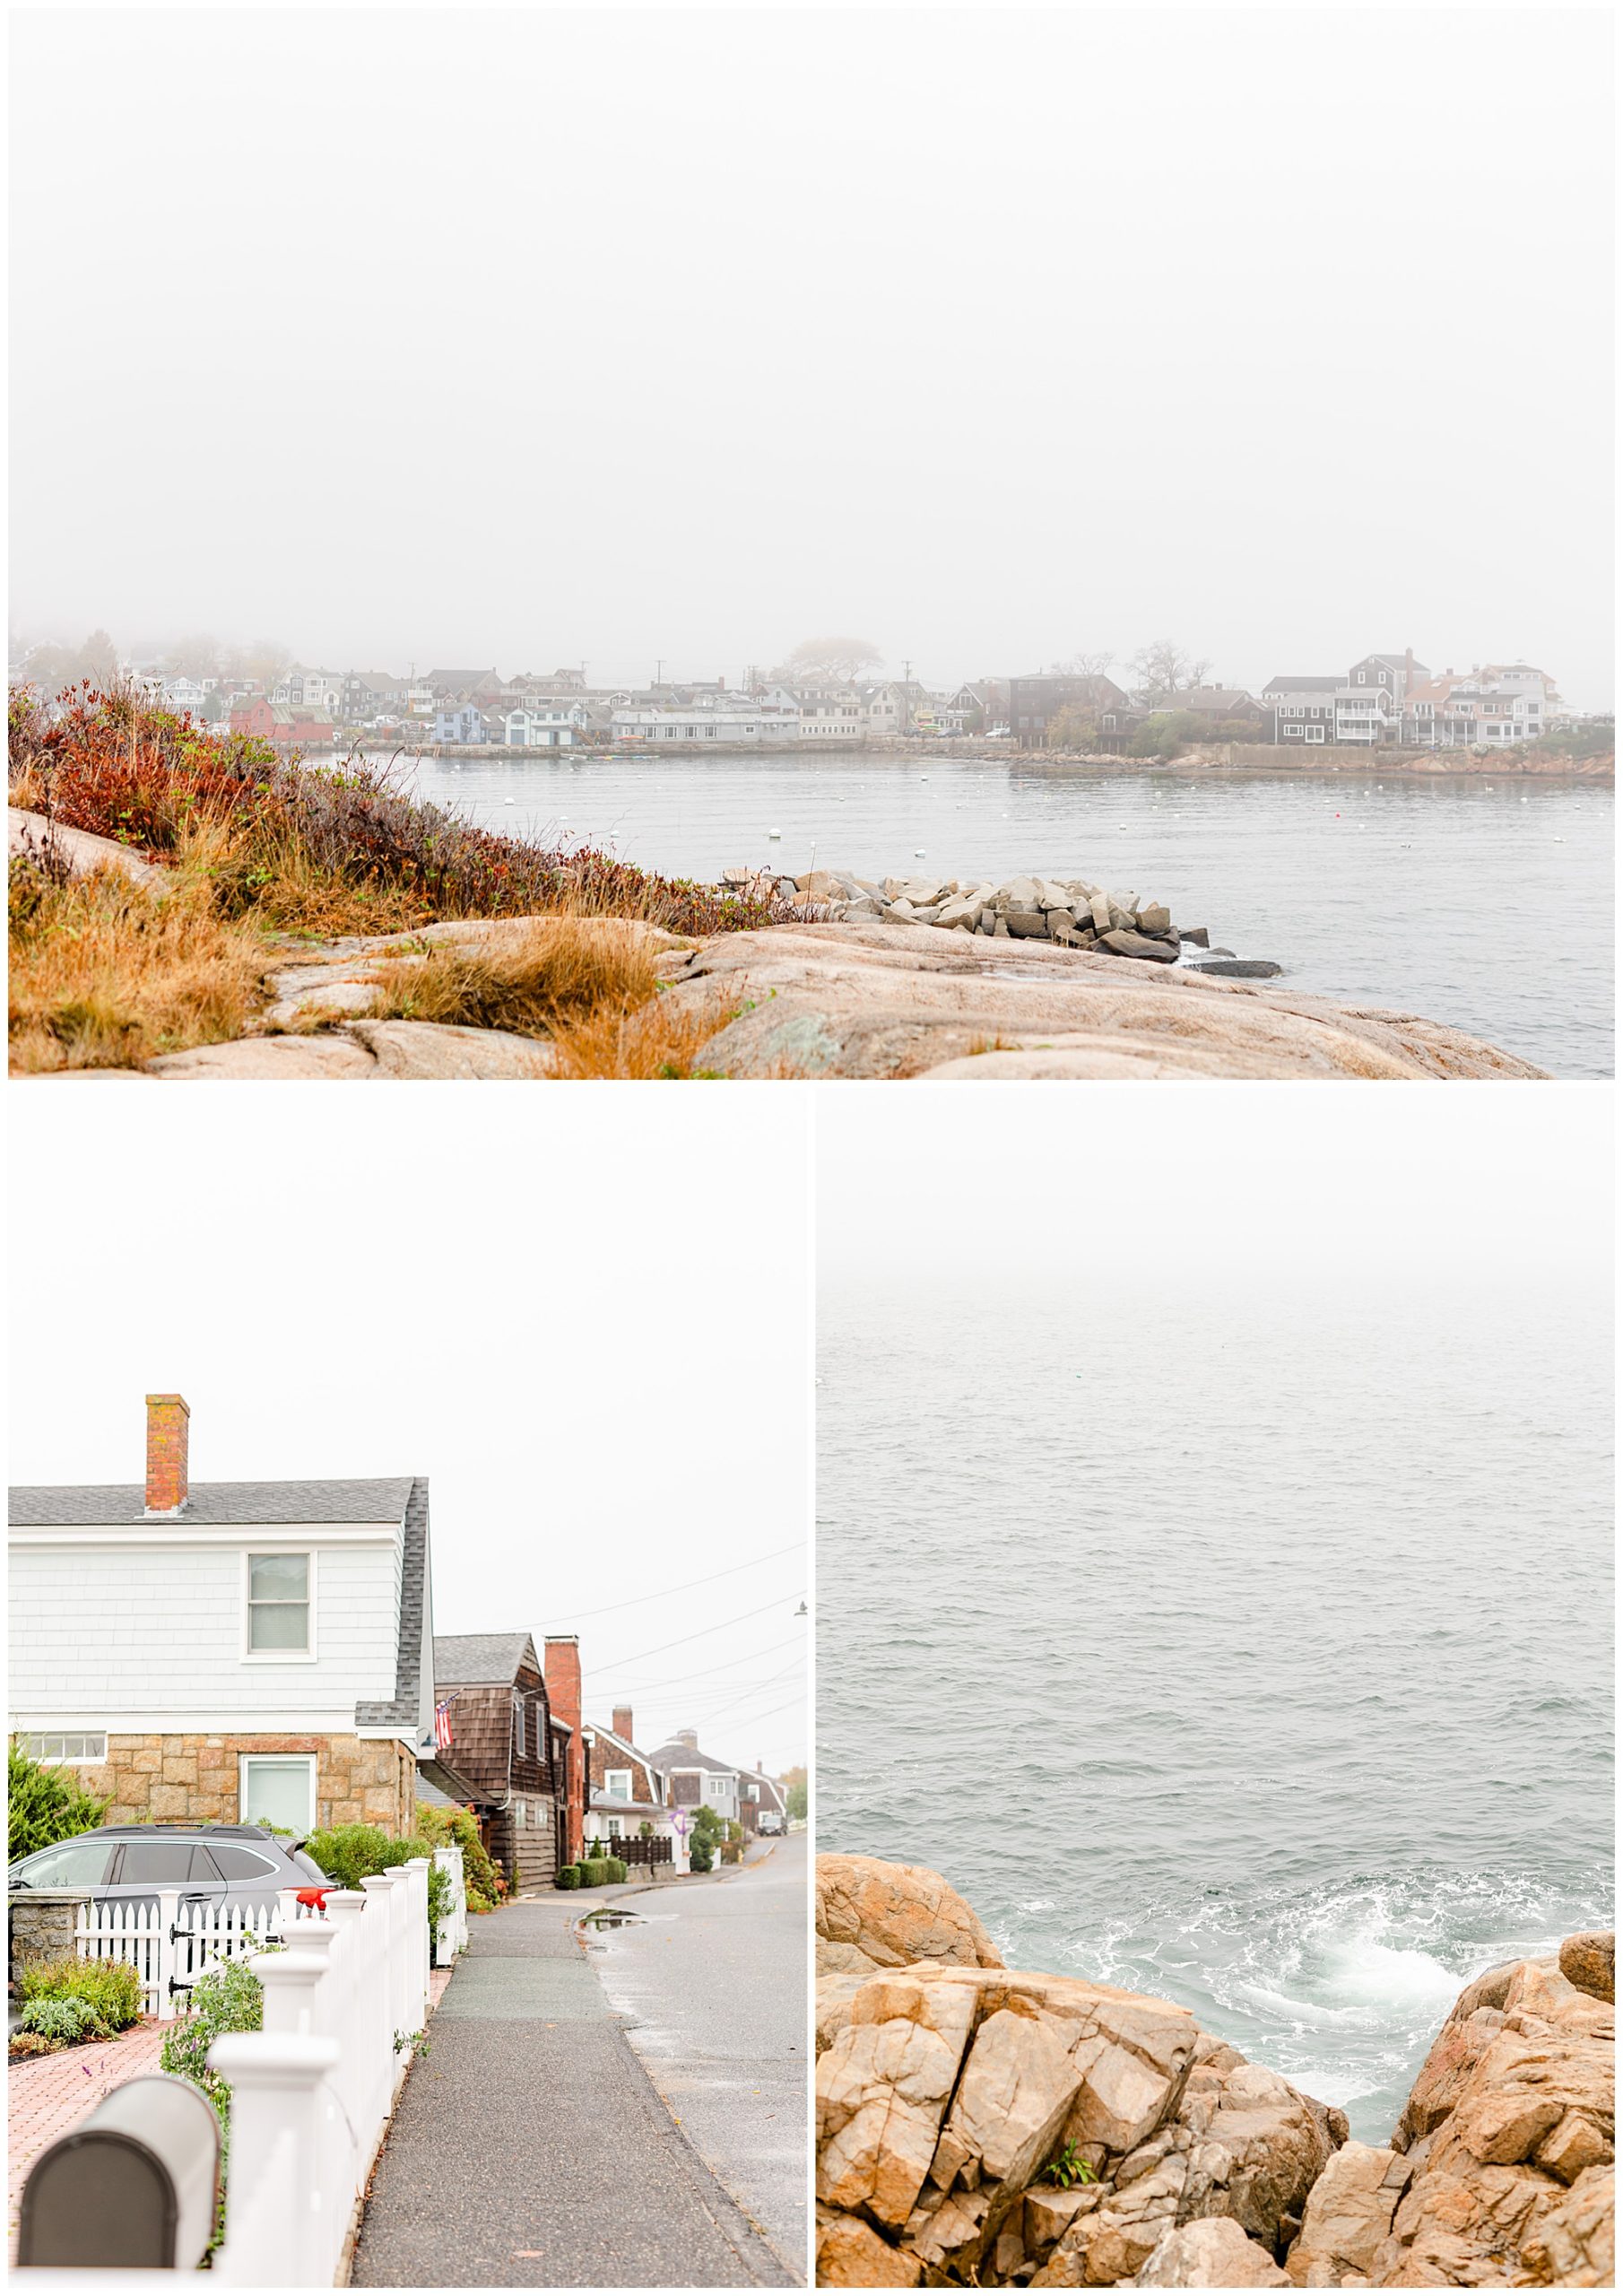 New England autumn prints, print shop, autumn photos, autumn prints, New England prints, Connecticut photos, Massachussetts photos, Rockport MA, Essex CT, the Headlands, waterfront prints, ocean prints, coastal New England prints, coastal prints, Rachel E.H. Photography Print Shop, landscape photography, houses on street, small whirlpool, fog over costal town